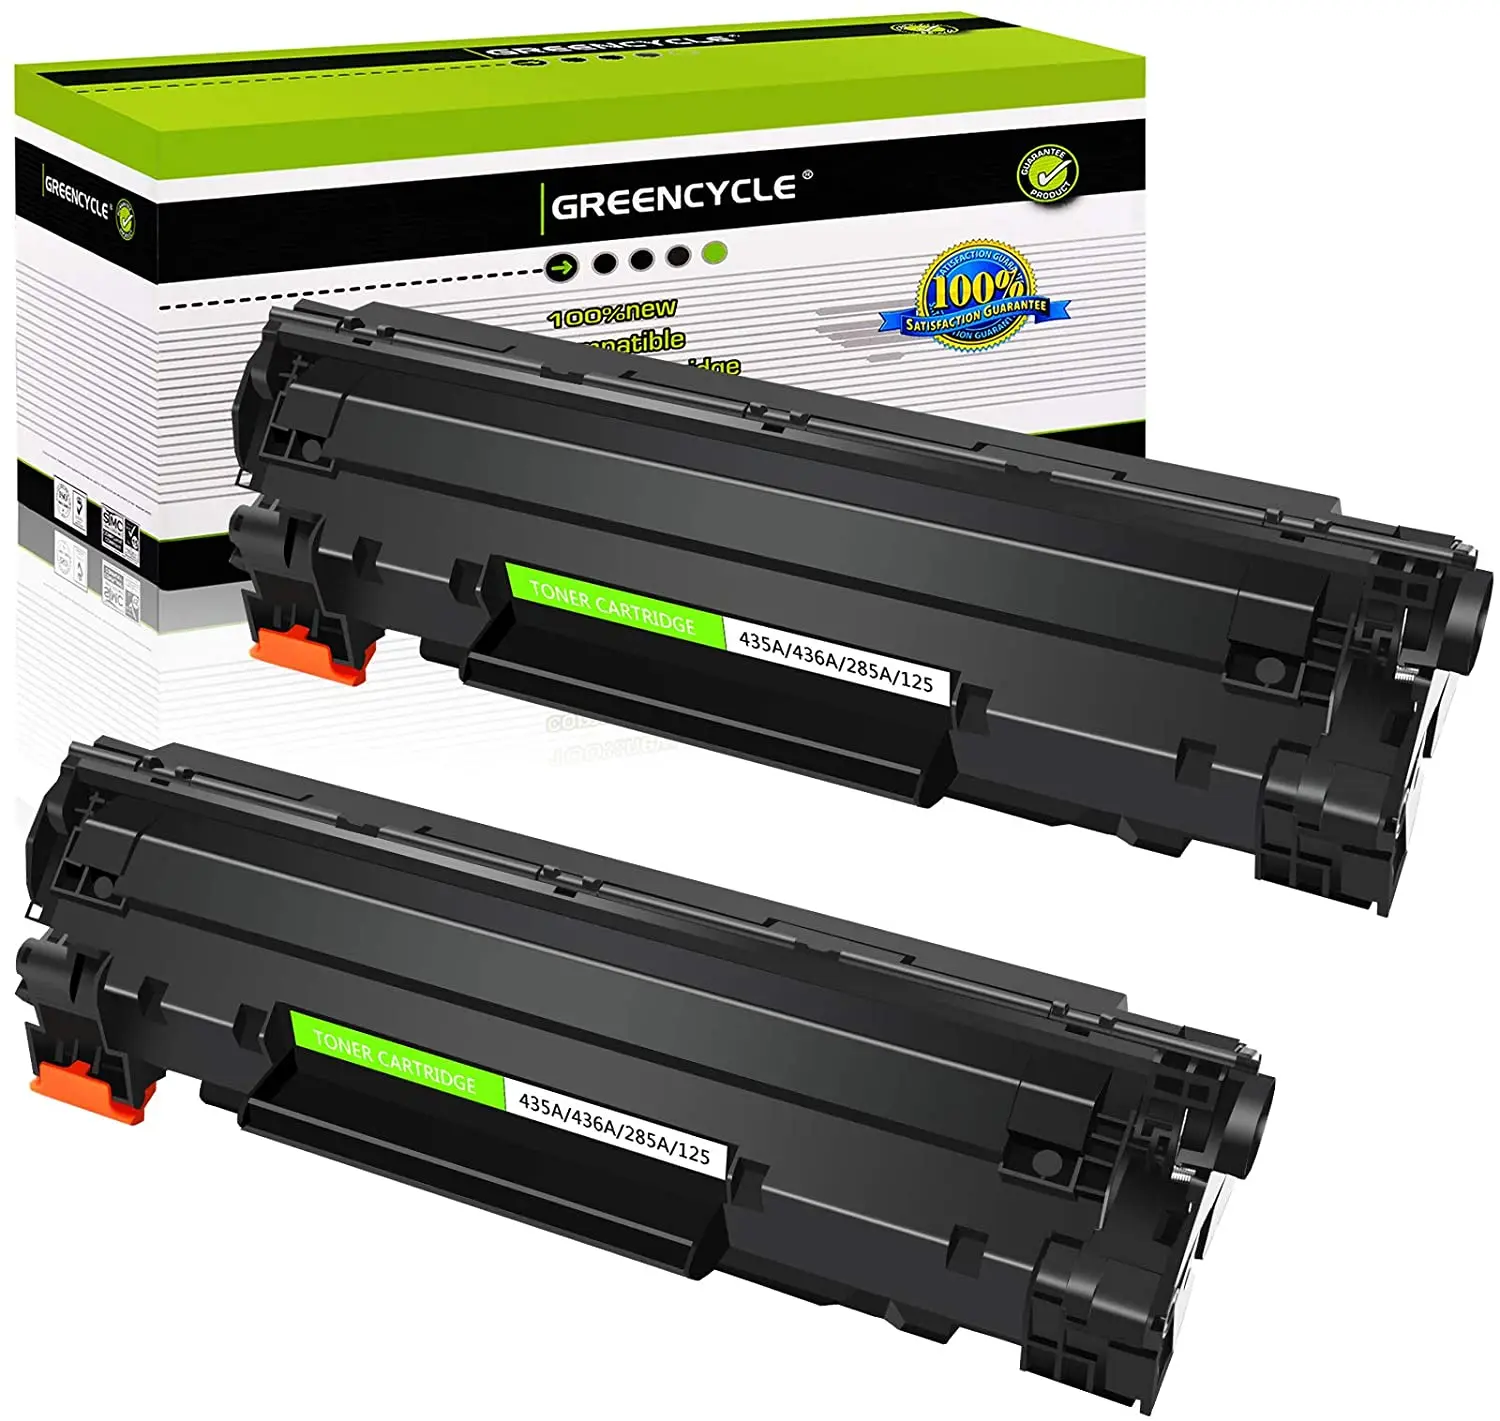 

GREENCYCLE Compatible Toner Cartridge Replacement for HP 85A CE285A 35A CB435A 36A CB436A Universal Version for Laserjet P1005